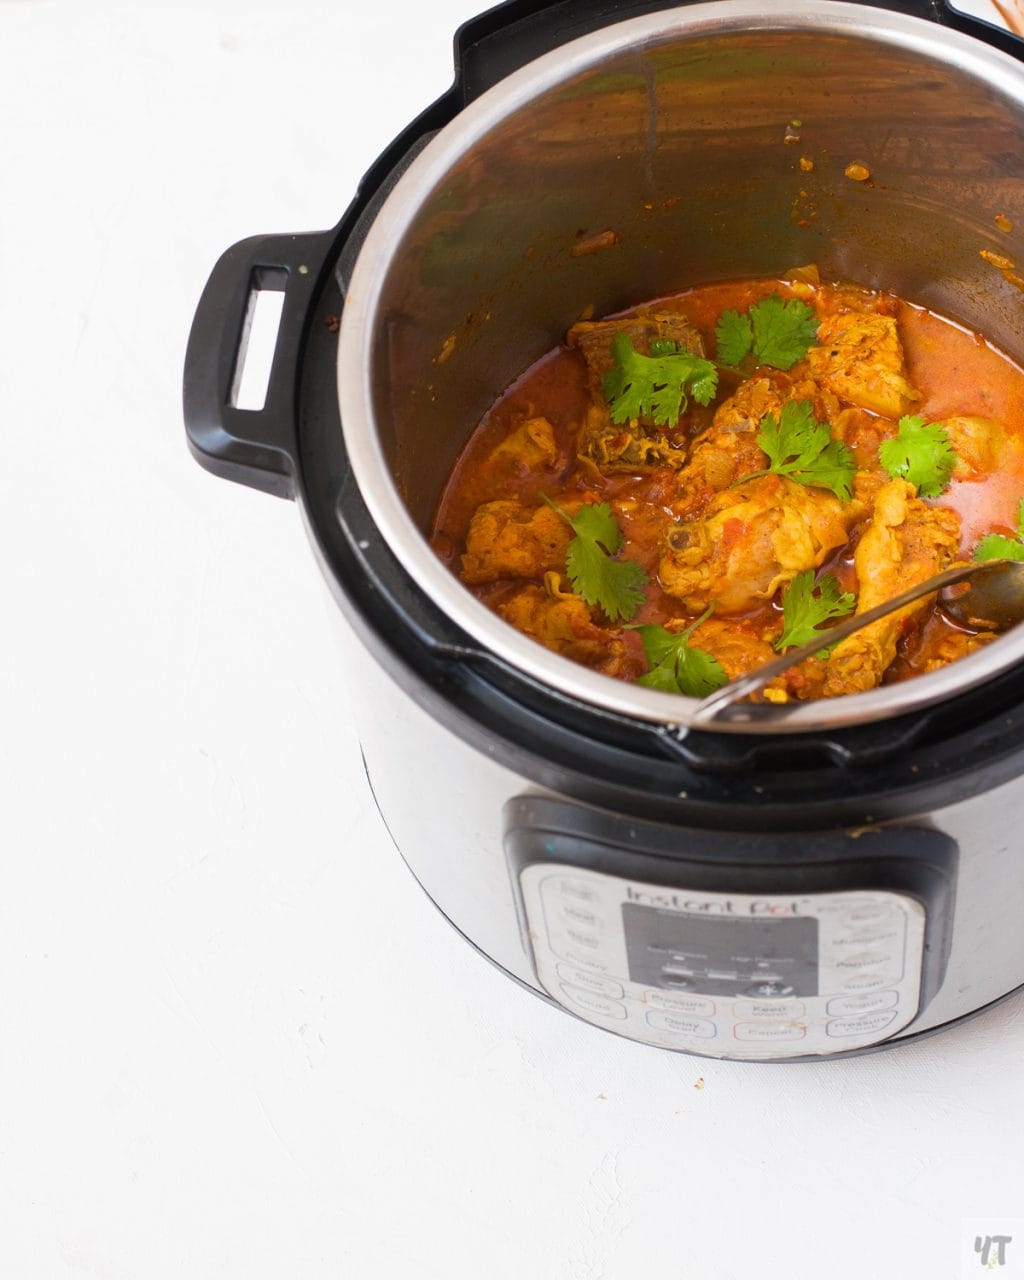 Instant Pot Indian Chicken Curry - Quick & Easy Desi Chicken Curry recipe made with bone in chicken, yogurt and spices under 30 minutes. #chickencurry #indian #instantpot #curry #easy #quick #indianfood #indianrecipe #recipe #instantpotindianrecipe